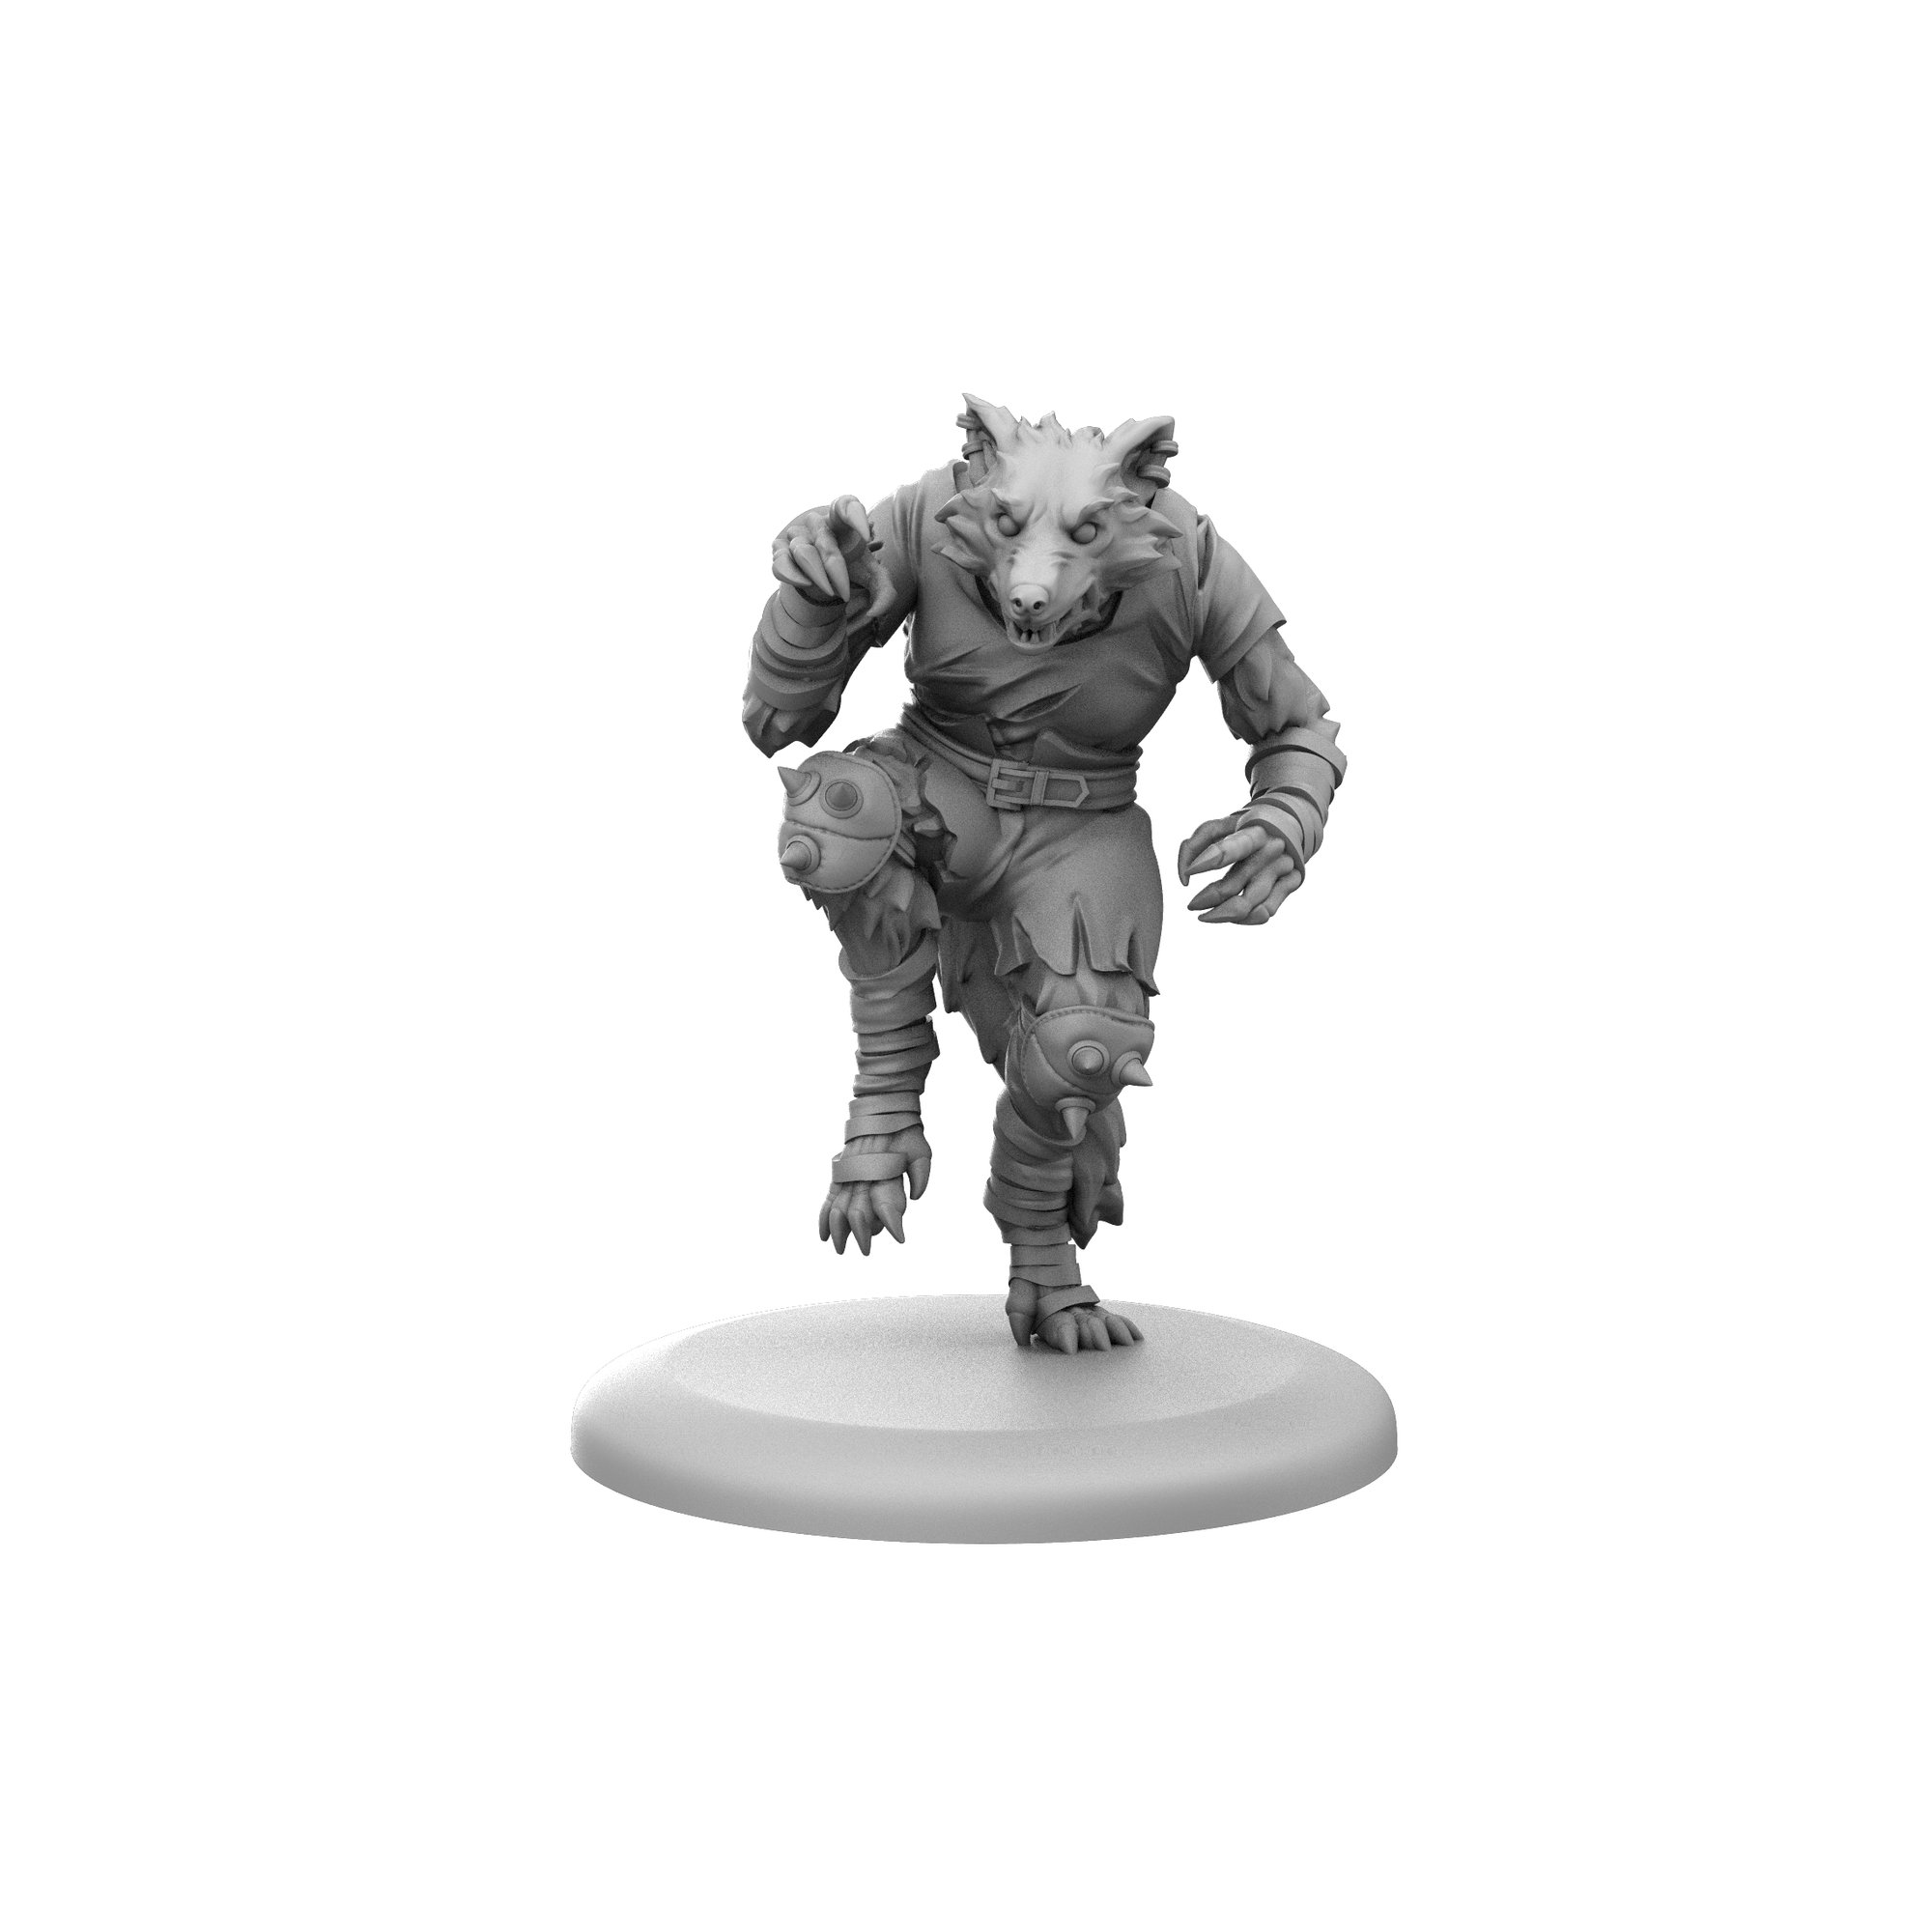 https://cdn.shopify.com/s/files/1/0147/3576/9664/products/exit-23-games-miniature-werewolf-1-11040960675904_2000x.png?v=1593207036